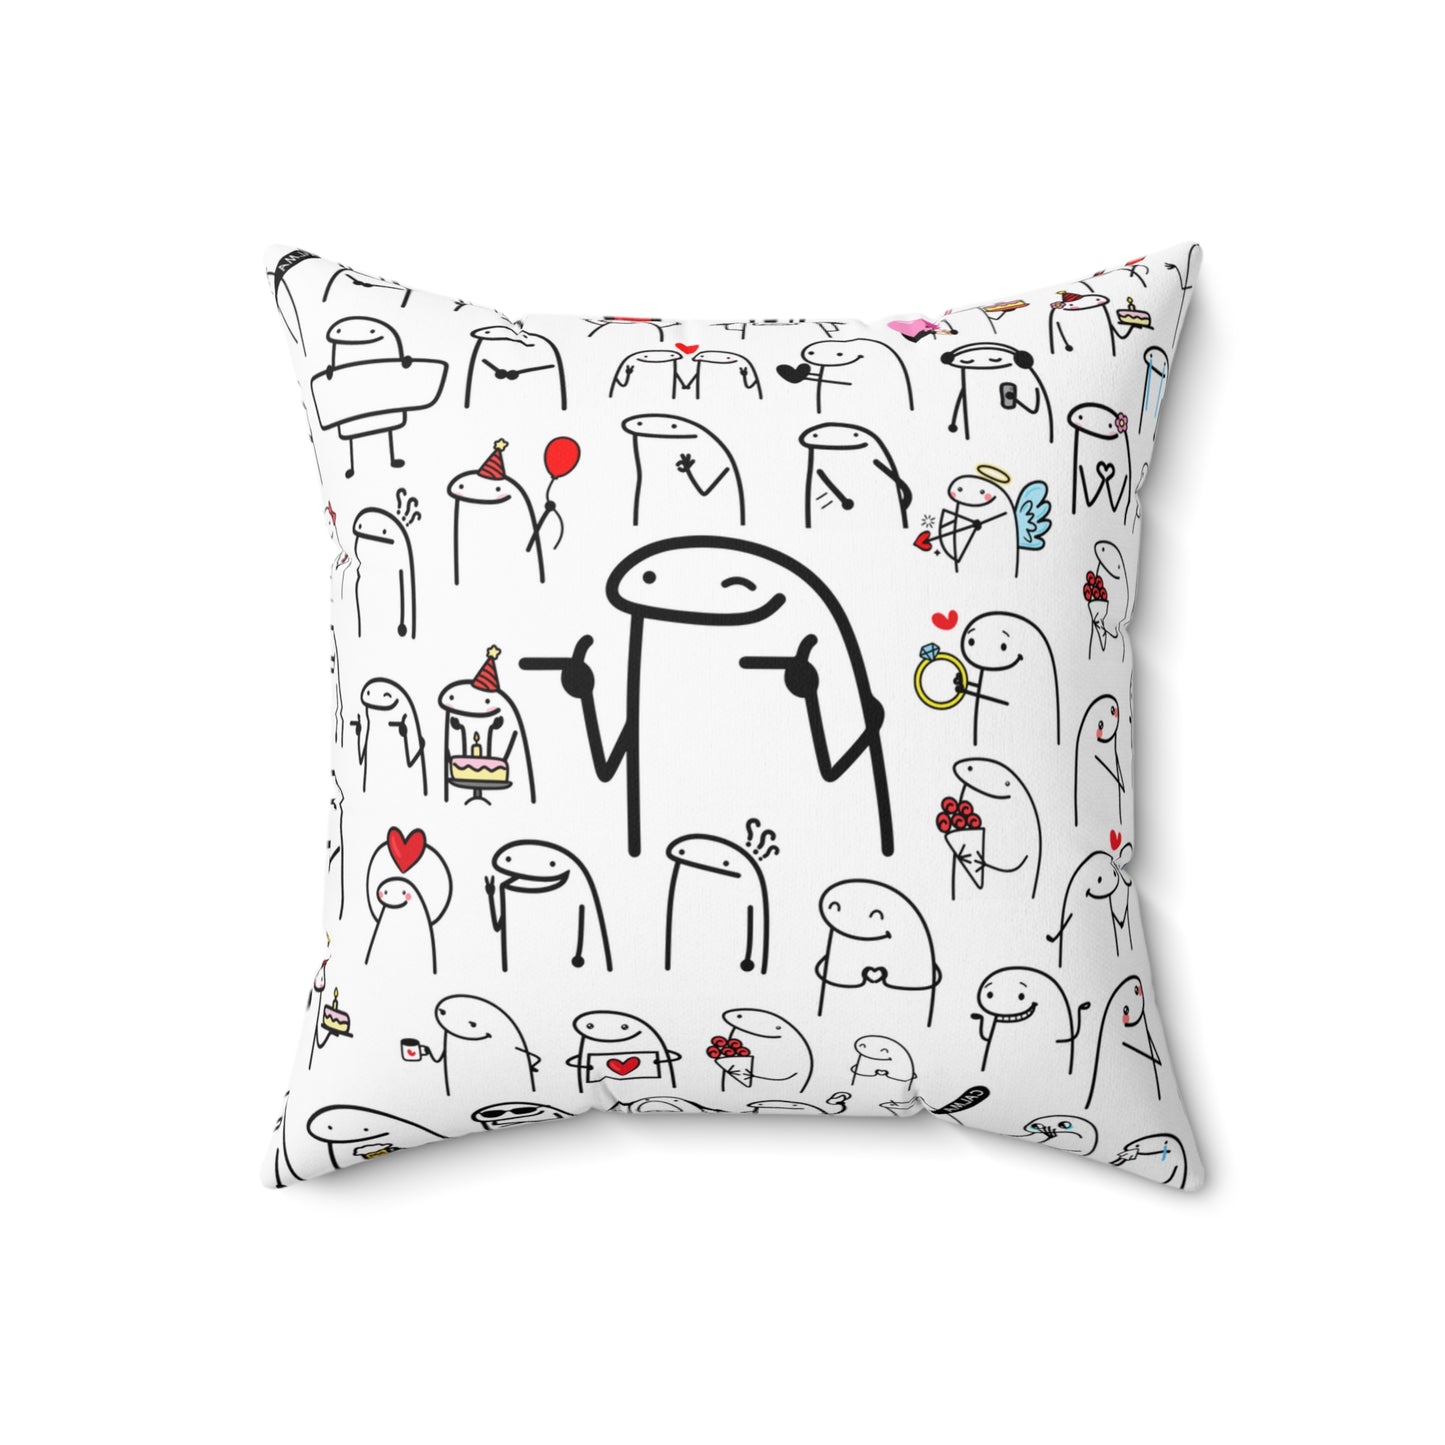 Modern and personalized cushion to decorate any space (Meme Flork)